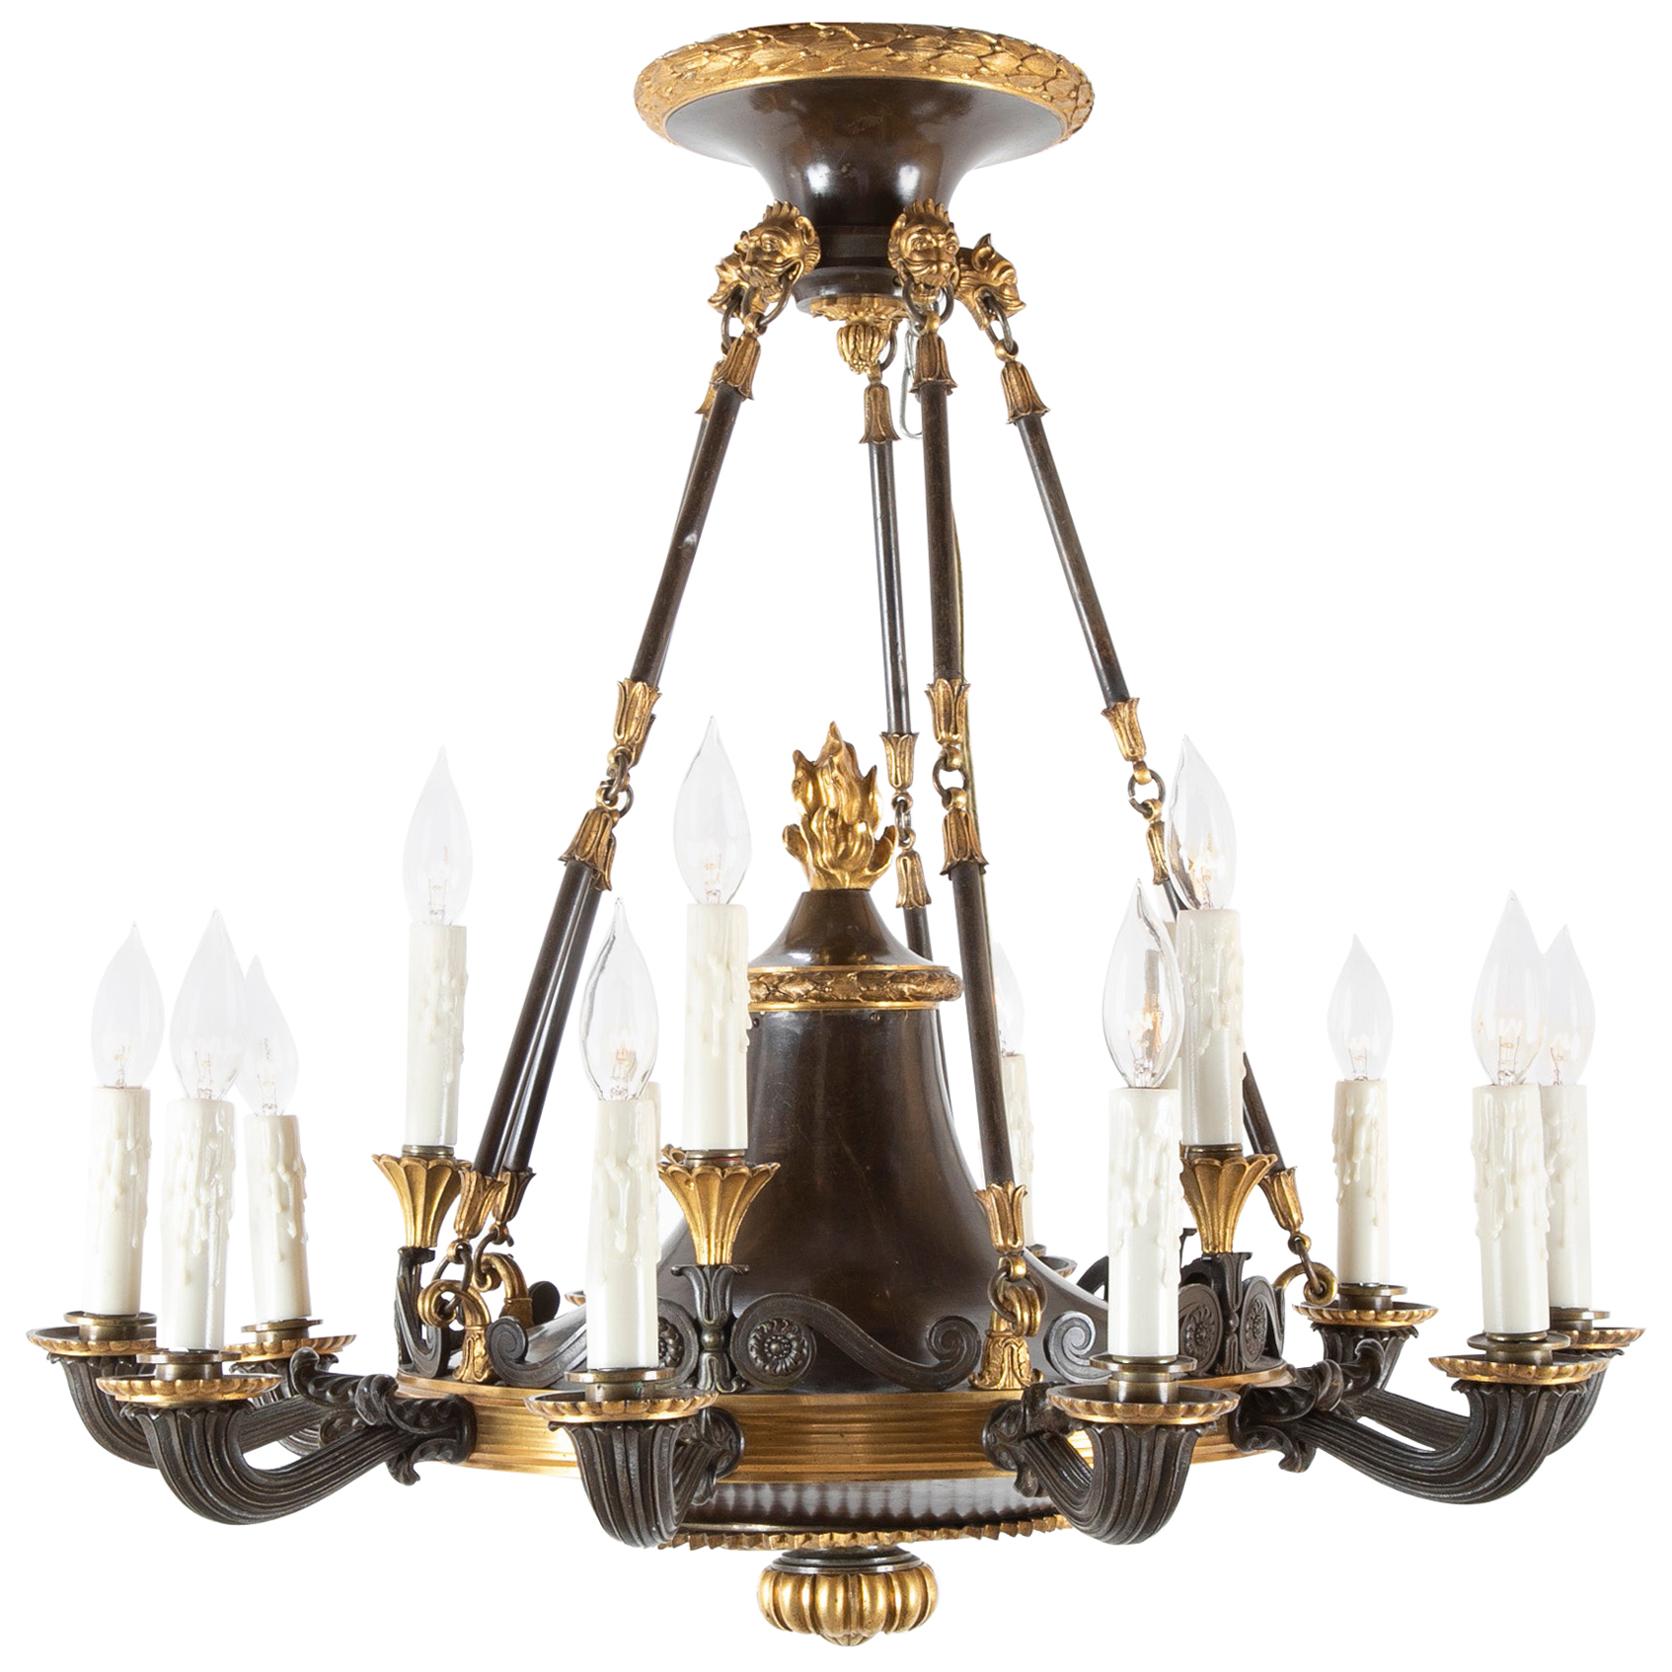 English Regency Patinated and Gilt Bronze 15-Light Chandelier